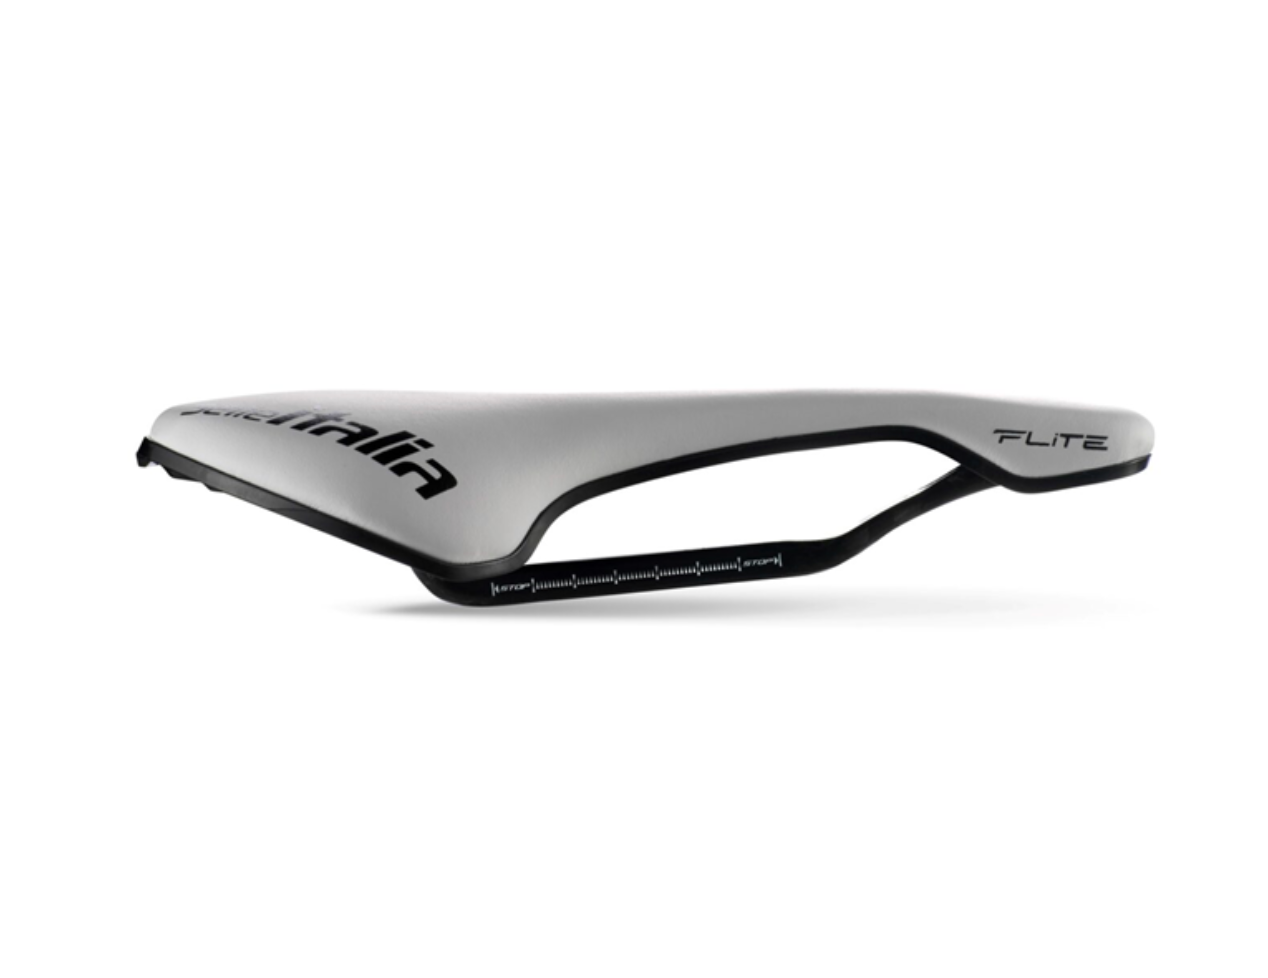 Sillín Selle Italia Flite Boost Superflow Carbon L3 MVDP  Limited Edition